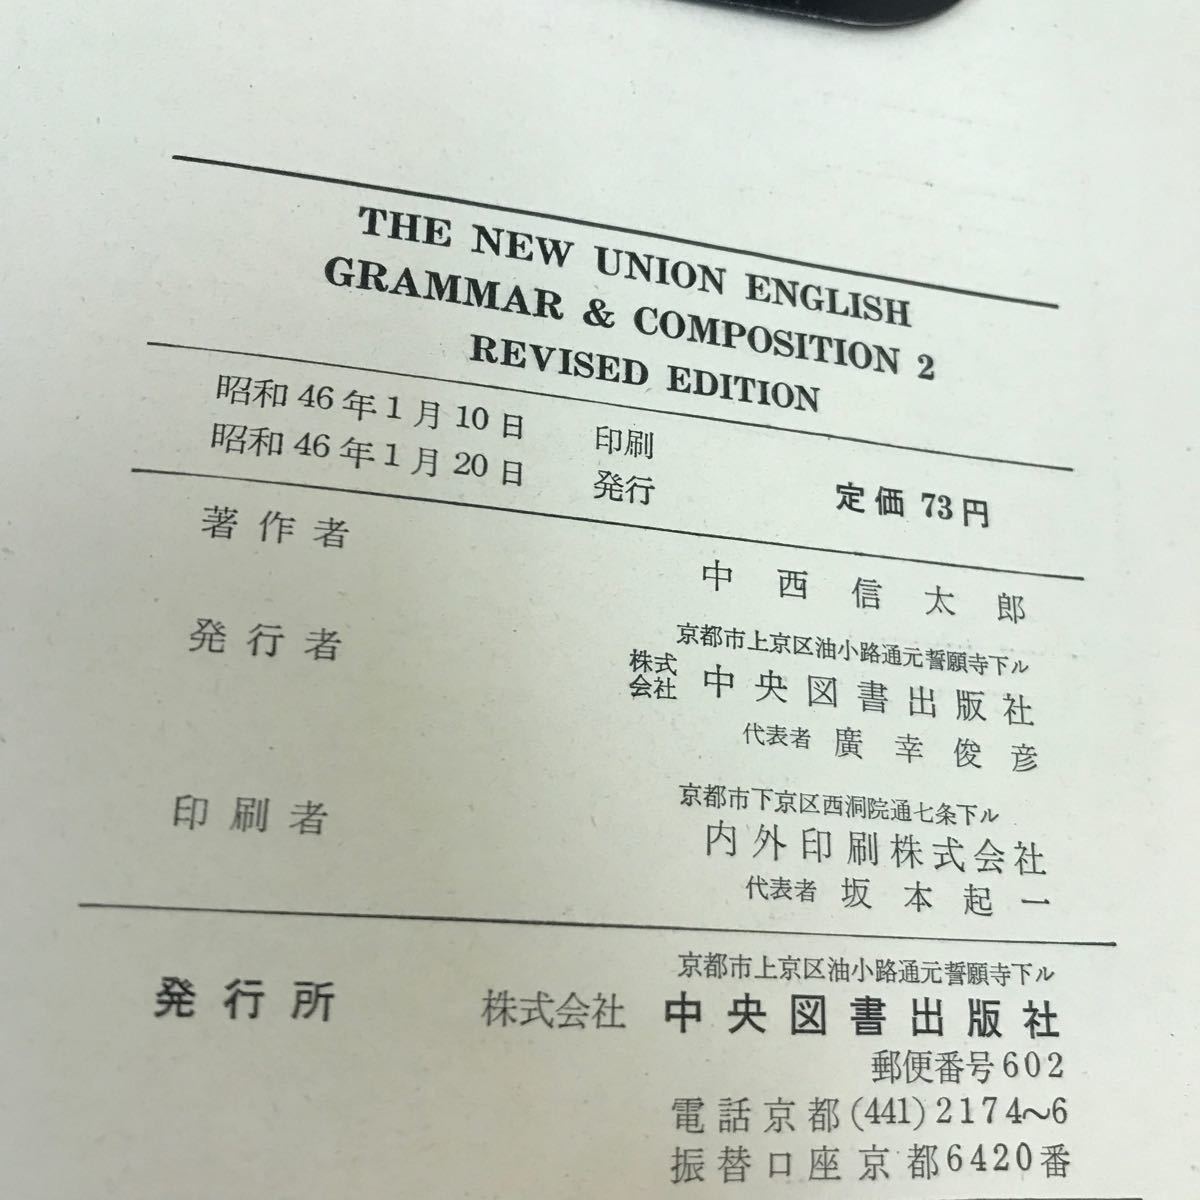 D05-023 THE NEW UNION ENGLISH GRAMMAR & COMPOSITION REVISED EDITION 中央図書 文部省検定済教科書 書き込み多数有り _画像4